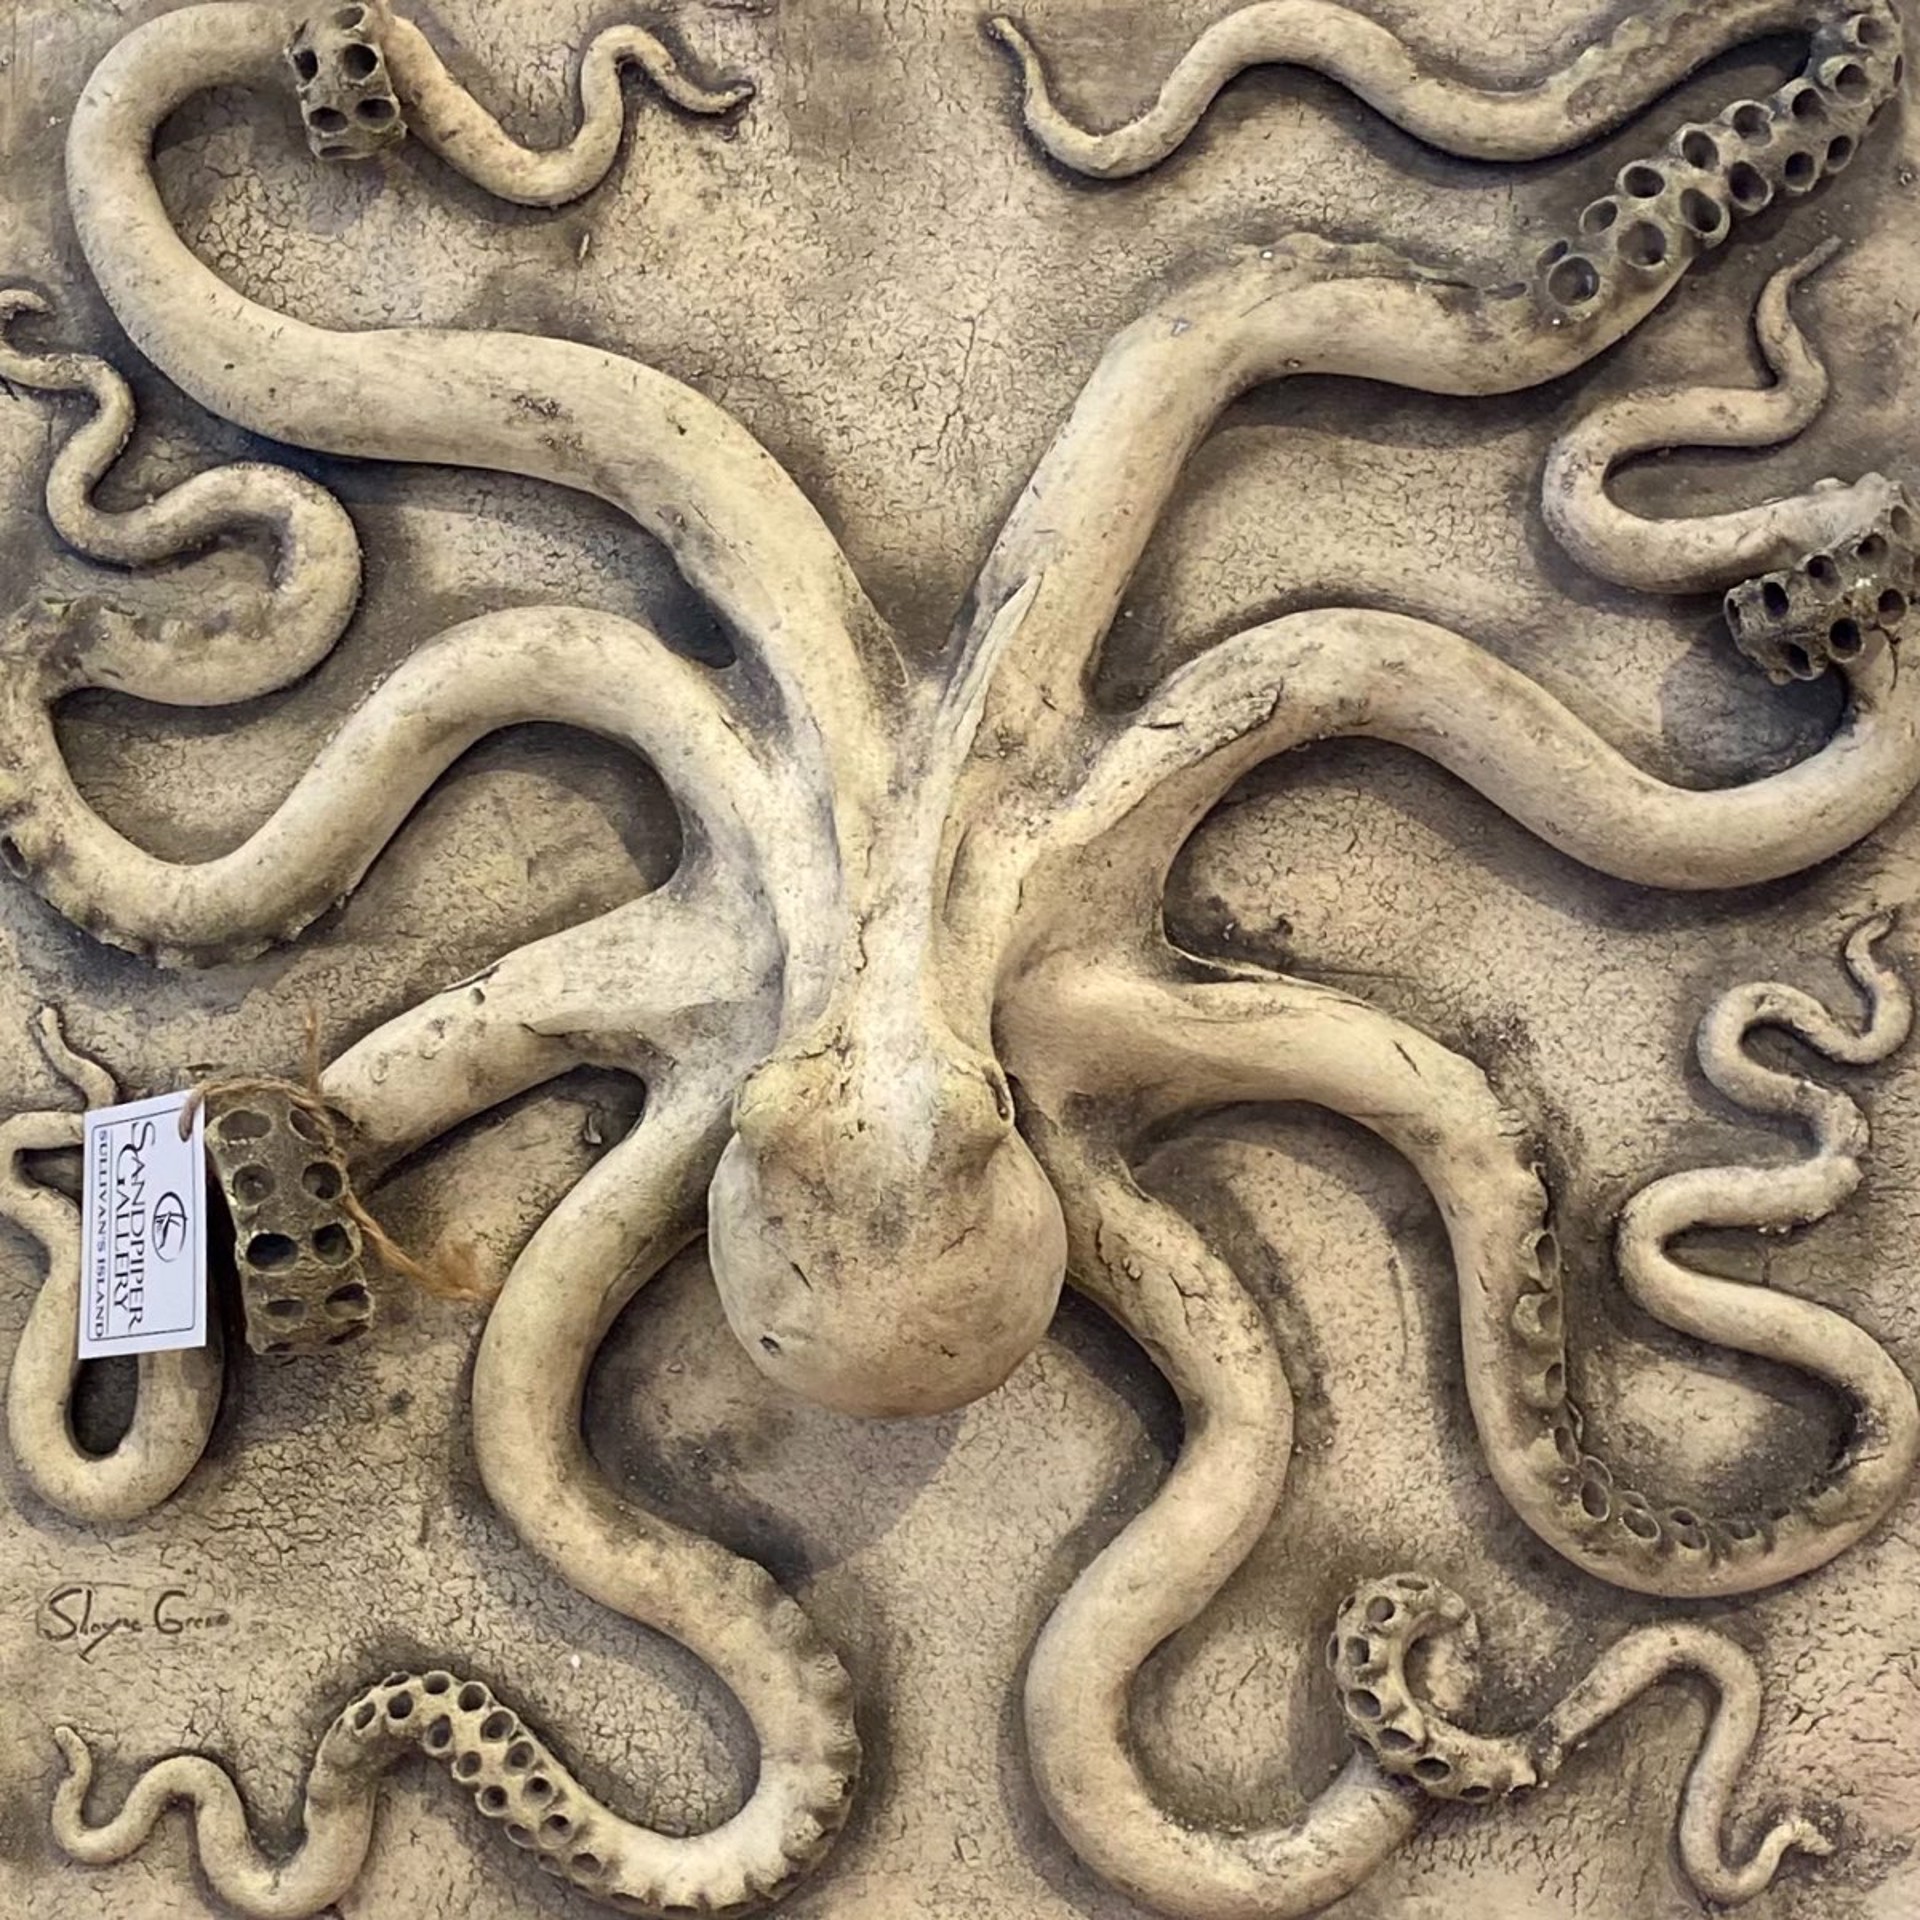 SG22-88 Octopus Wall Tile by Shayne Greco